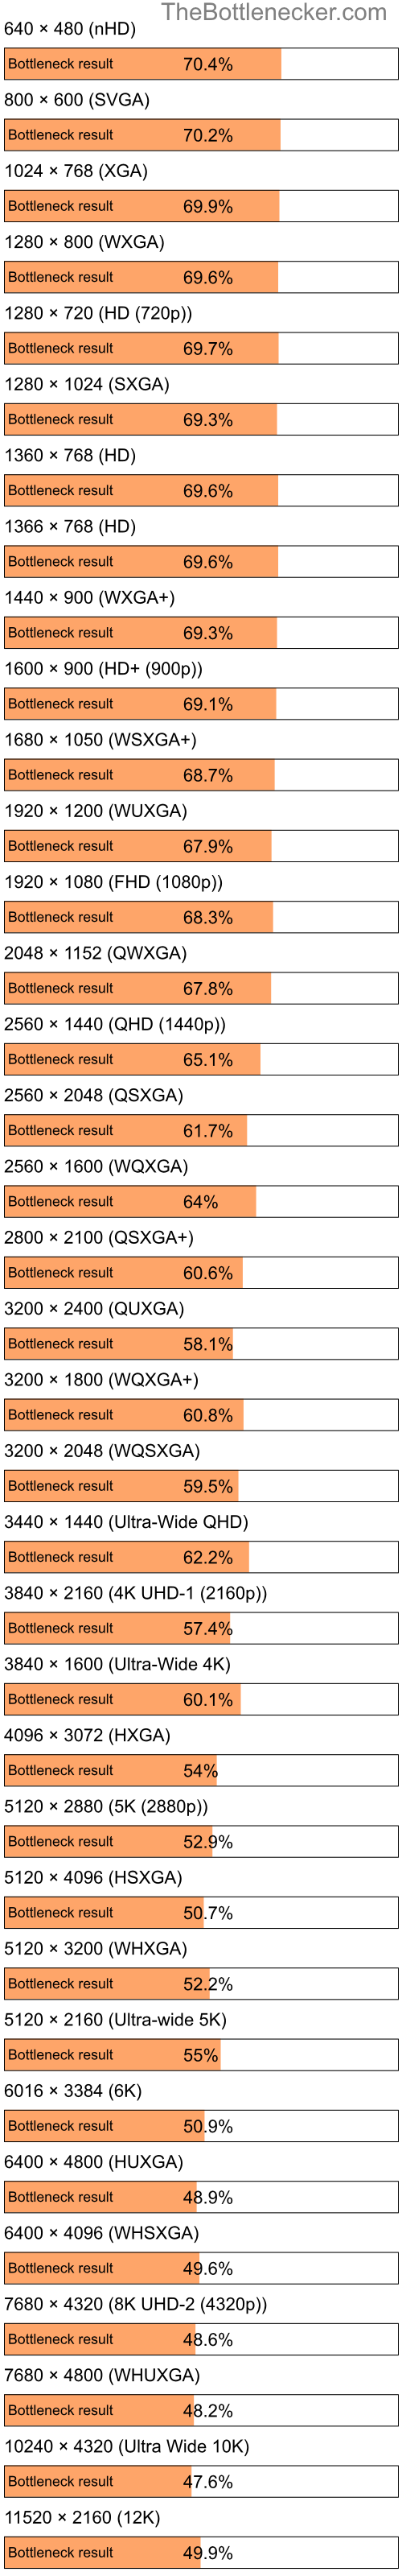 Bottleneck results by resolution for Intel Core i7-870 and NVIDIA GeForce RTX 4090 in Graphic Card Intense Tasks